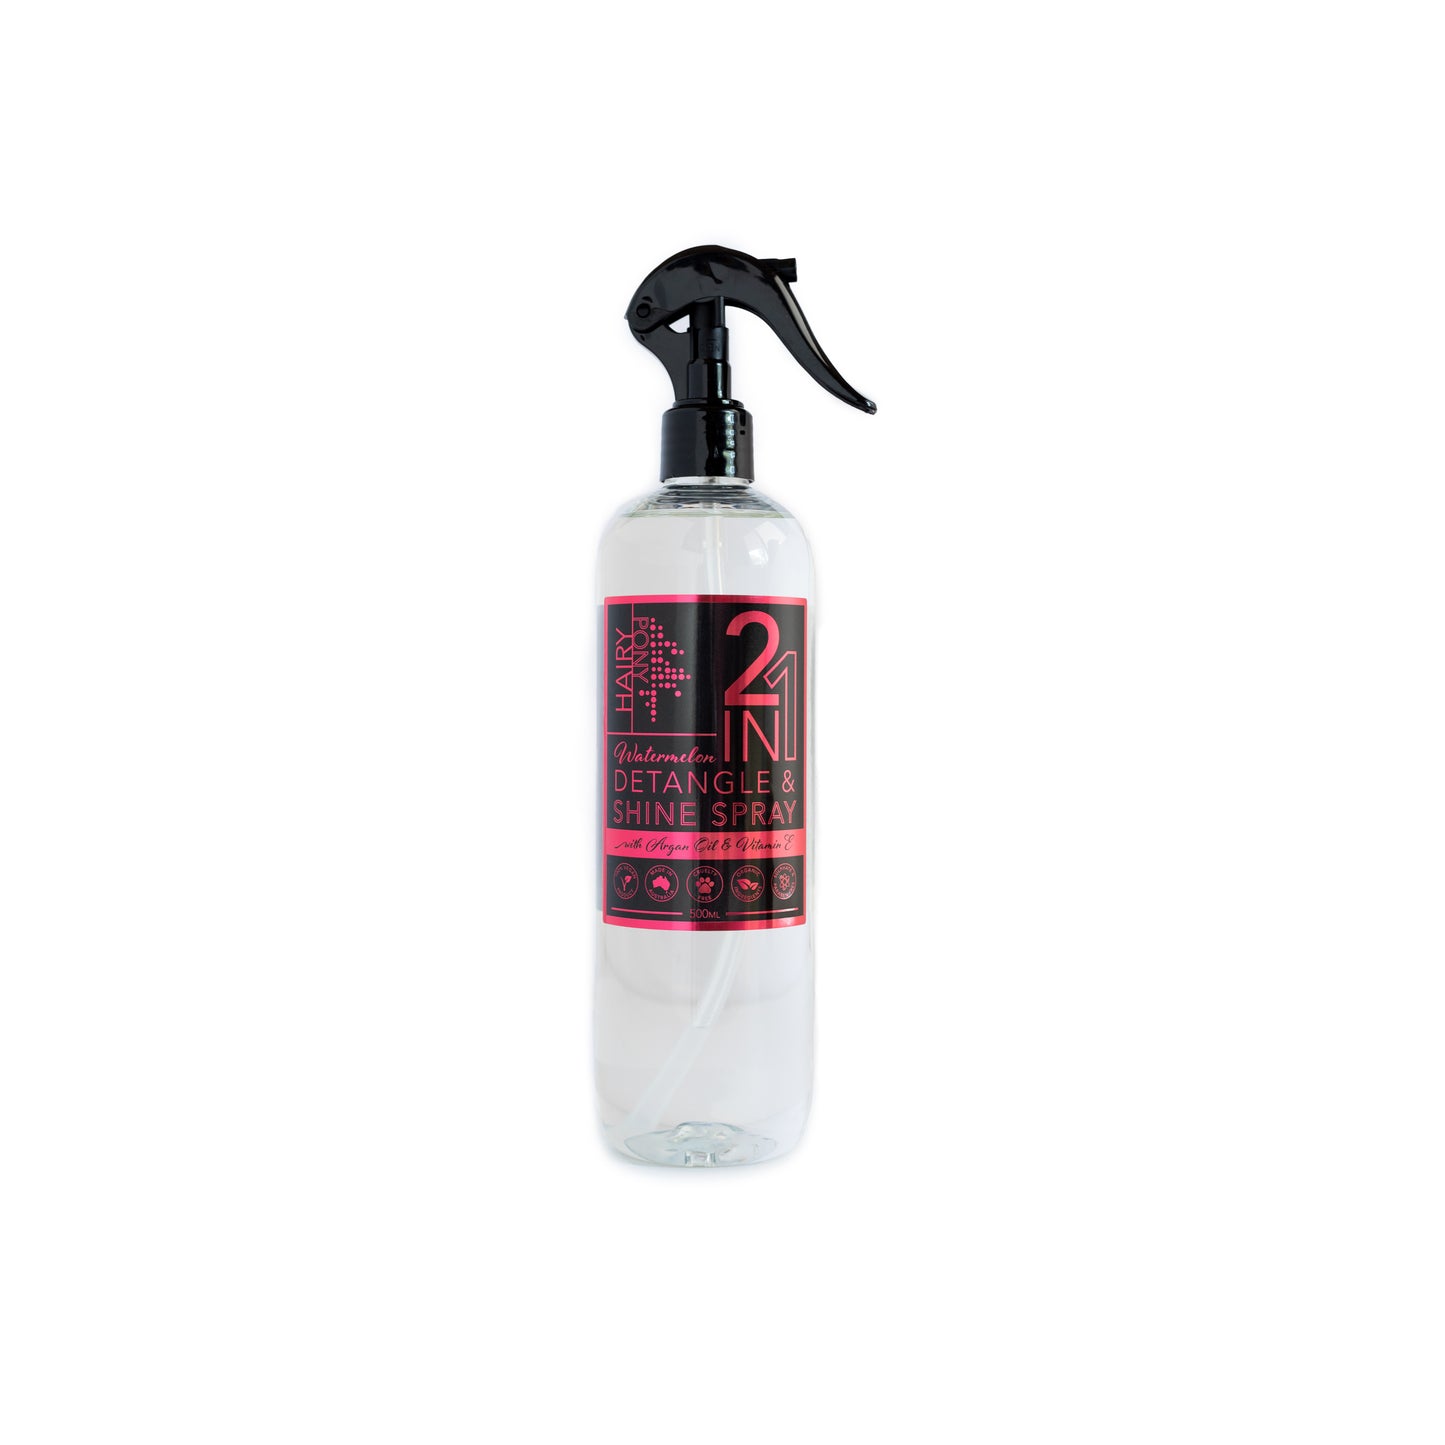 An image showing the Watermelon 2 In 1 Detangle & Shine Horse Detangler Spray in the 500ml bottle size with spray nozzle.